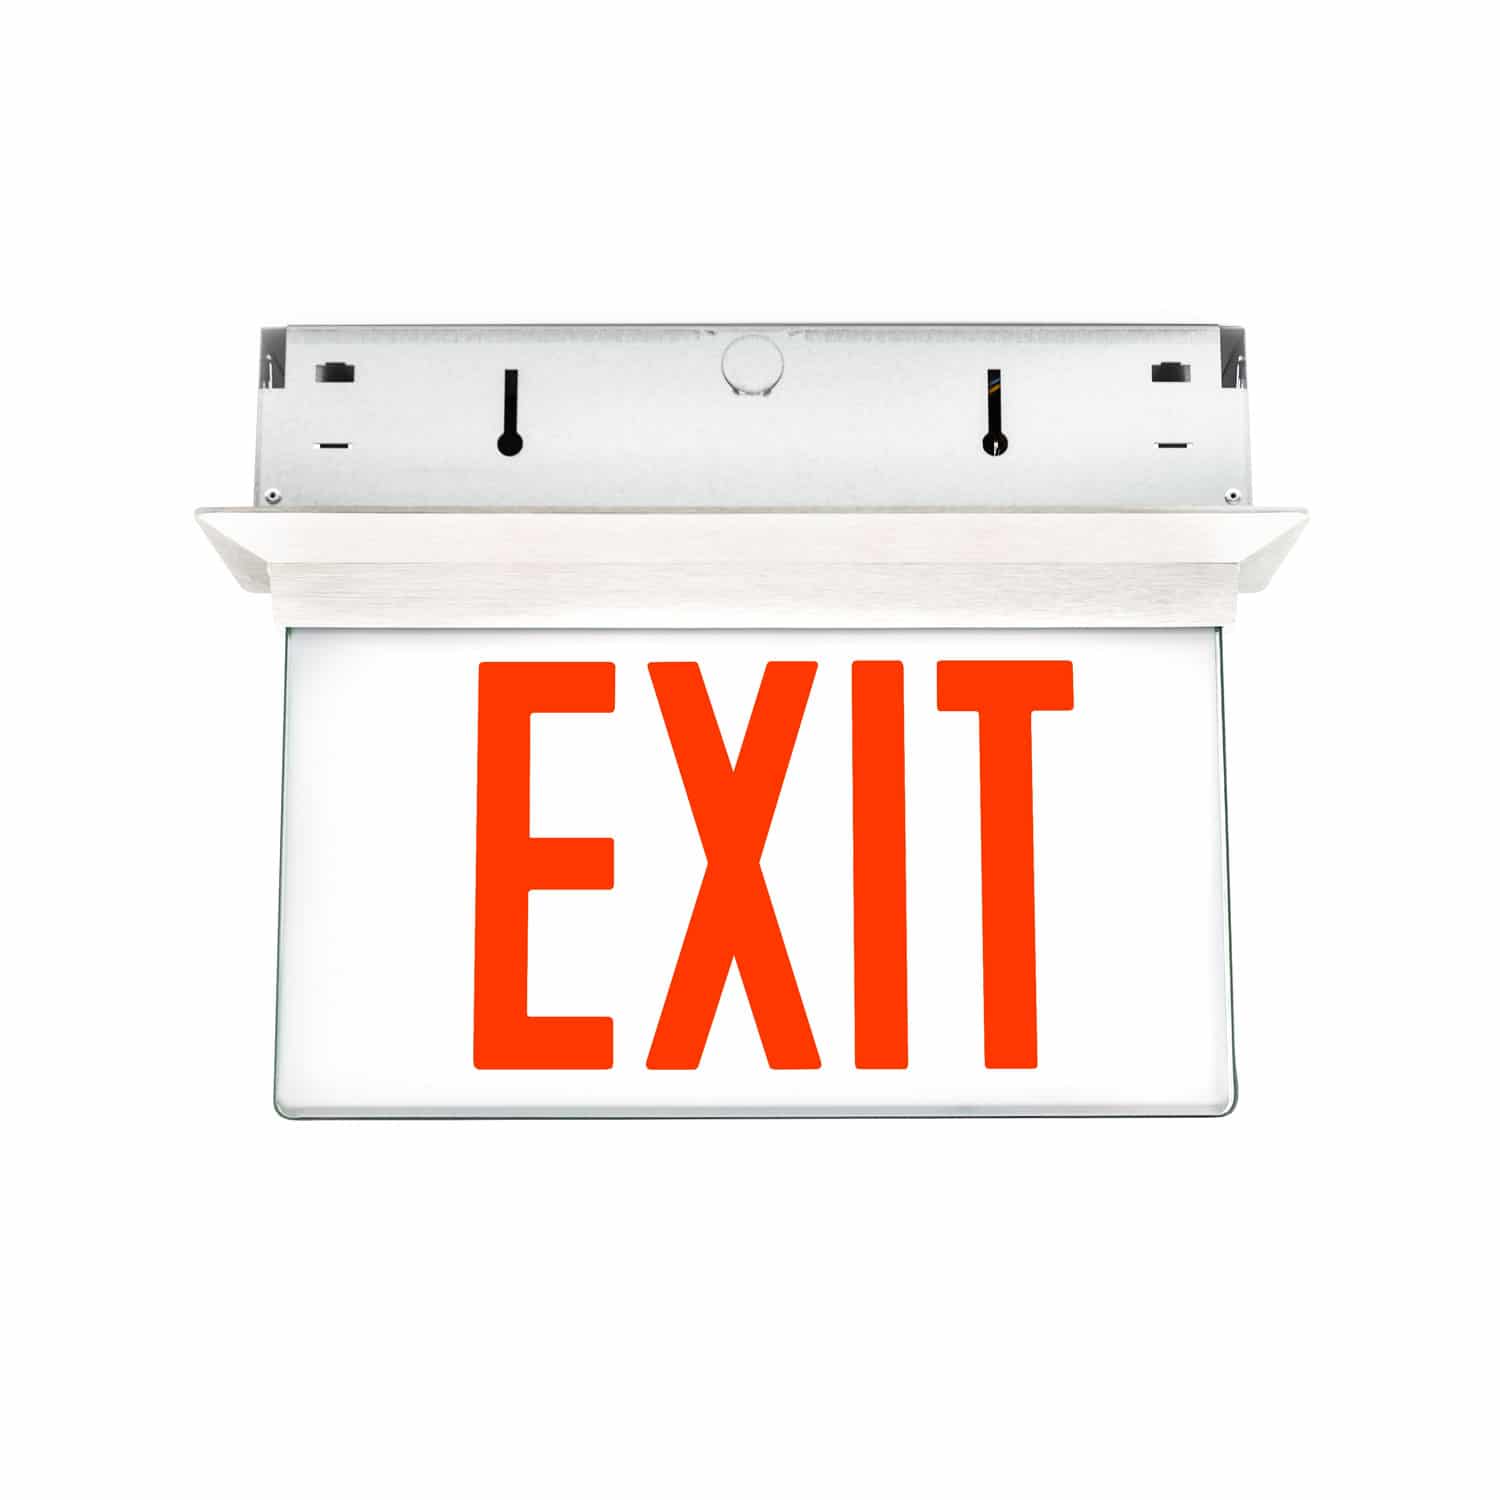 The ELTMR Elite Edge-Lit Master Exit Sign, Remote Capable provides illumination 4 times brighter than the UL 924 requirement.